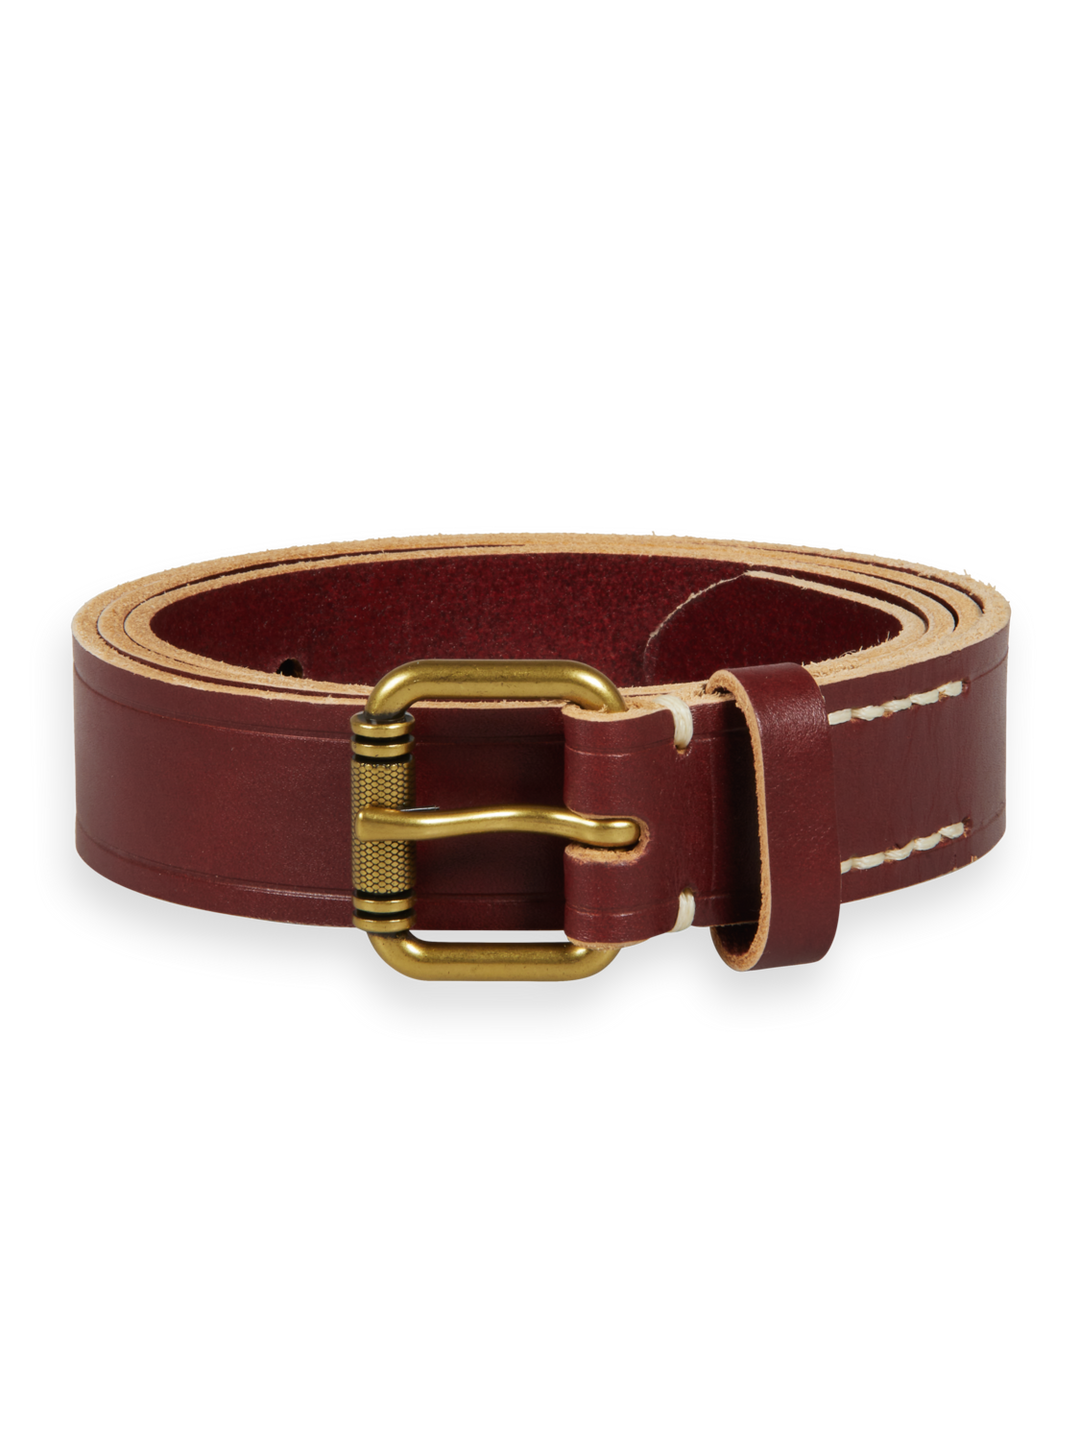 Leather Belt with Raw Edge in Garnet | Buster McGee